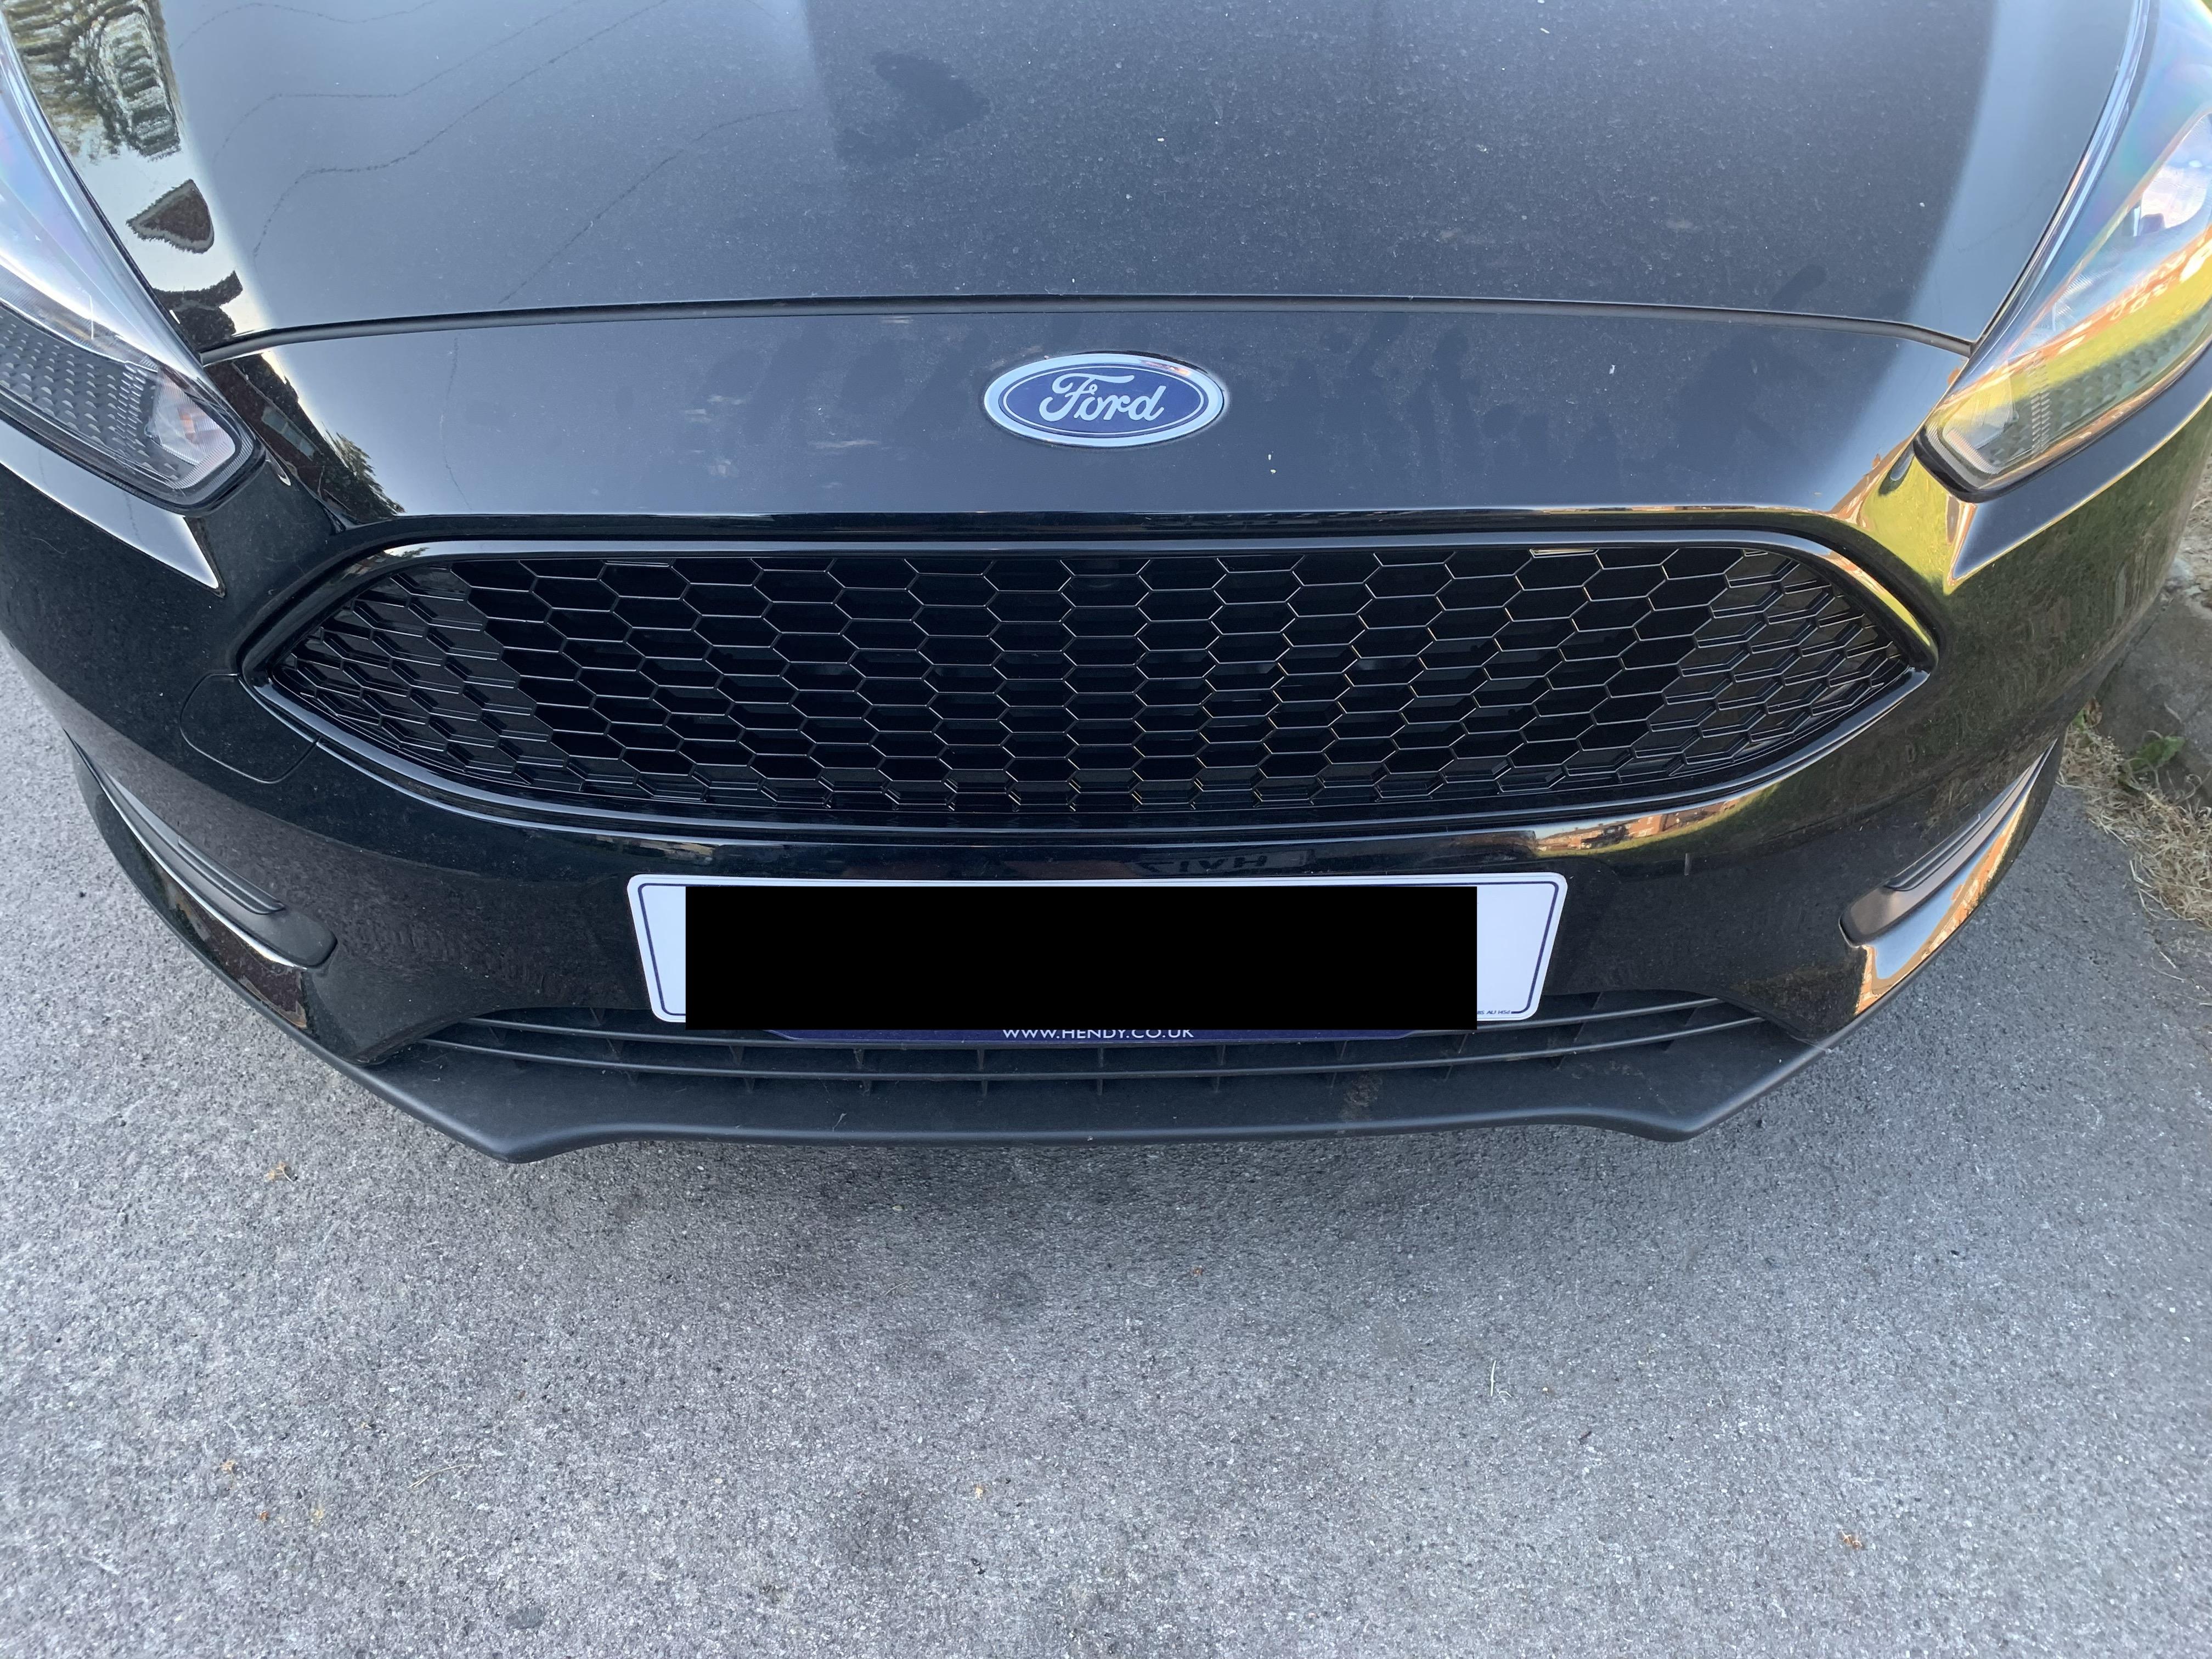 Replacing Ford Focus Grille (2018) - Ford Focus Club - Ford Owners Club -  Ford Forums